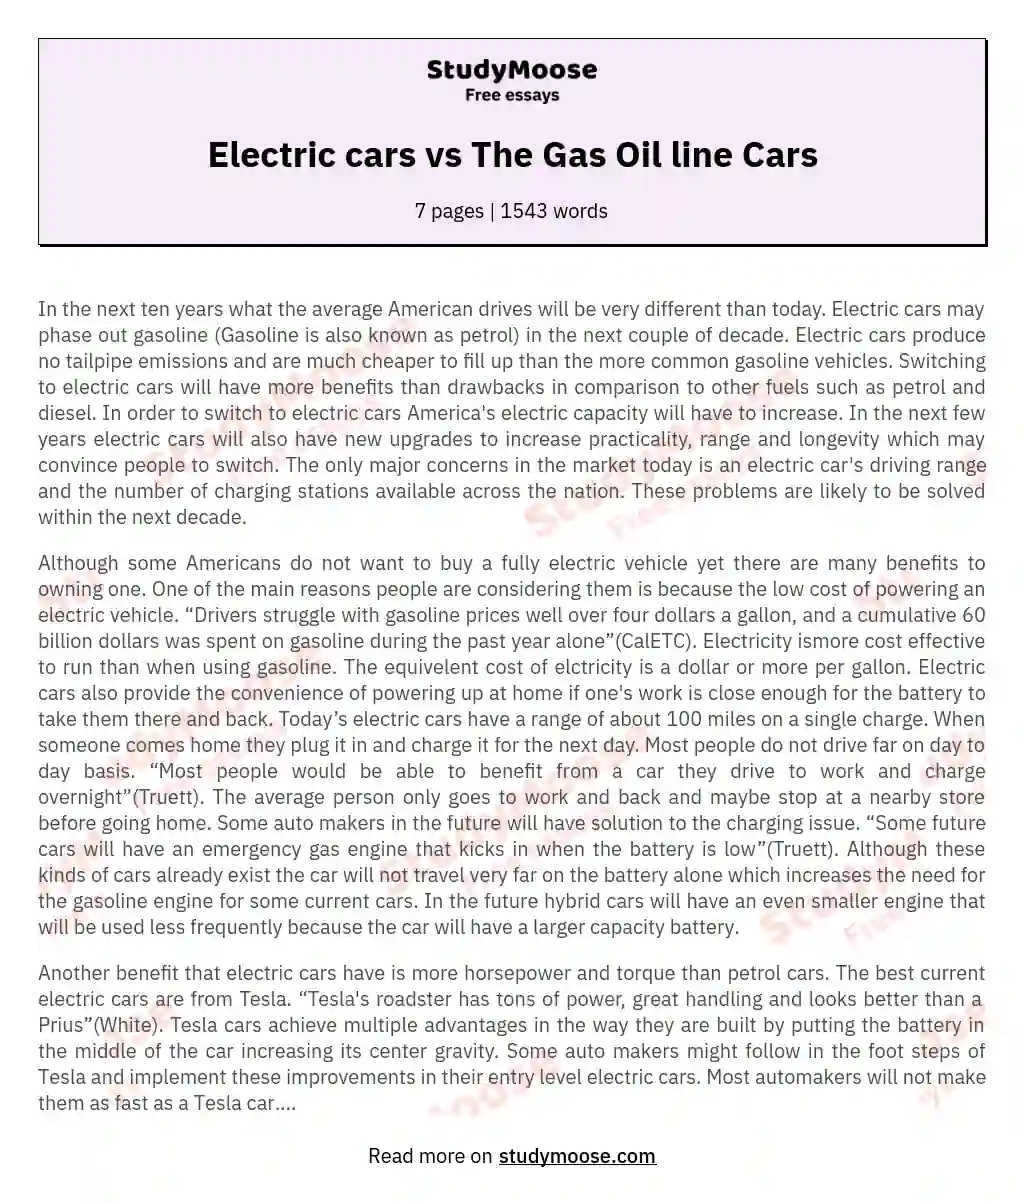 Electric cars vs The Gas Oil line Cars essay